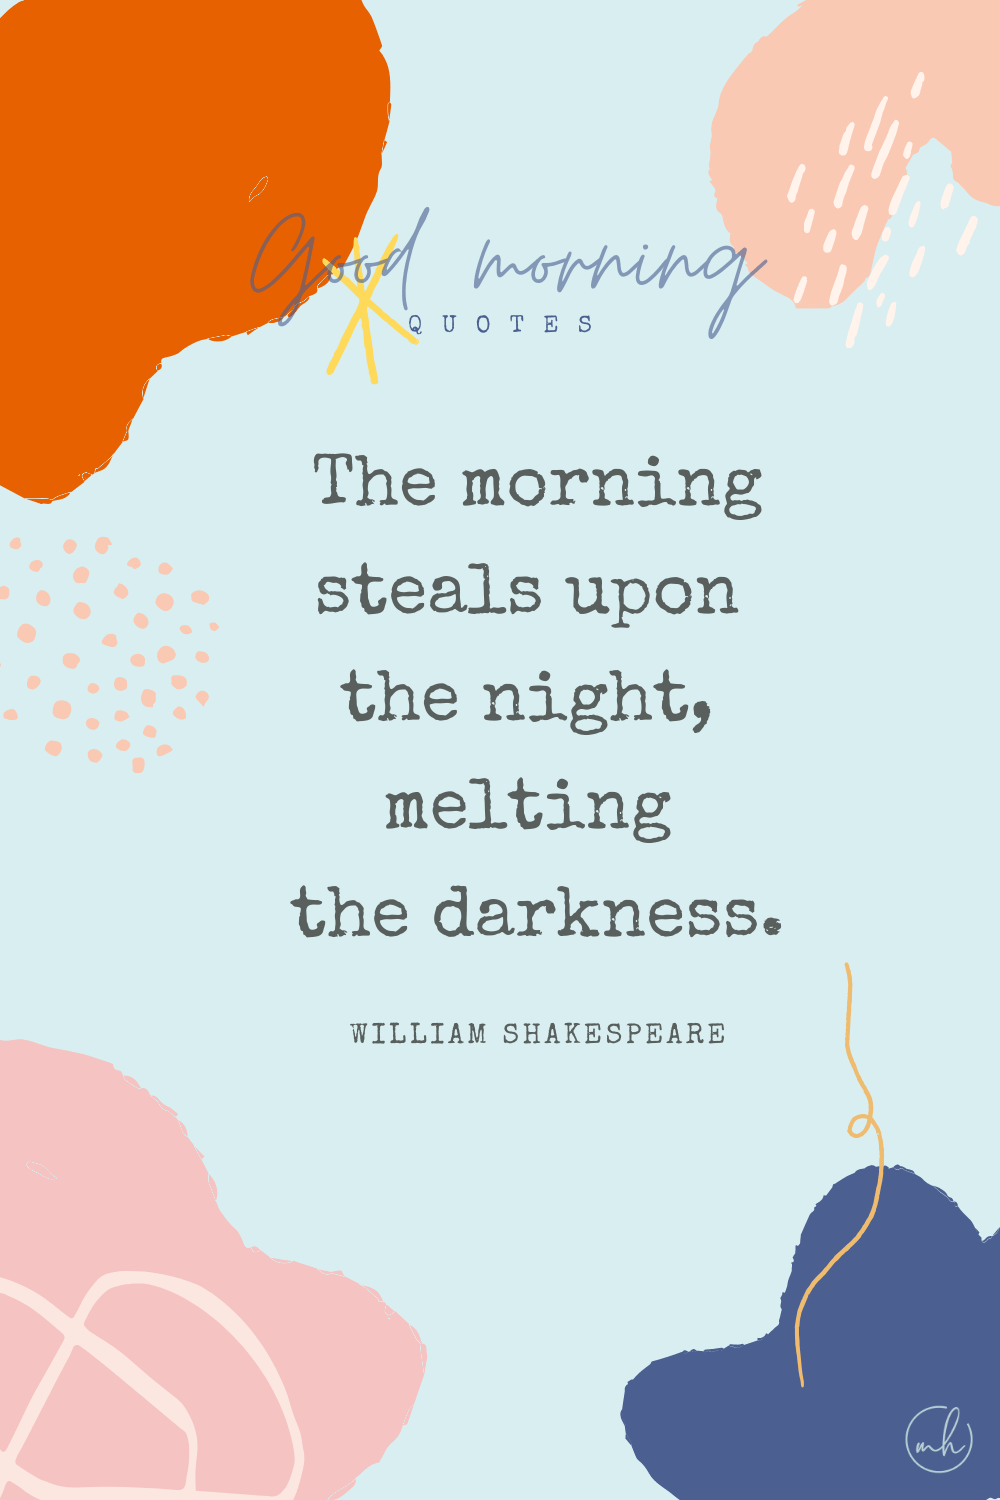 "The morning steals upon the night, melting the darkness." – William Shakespeare